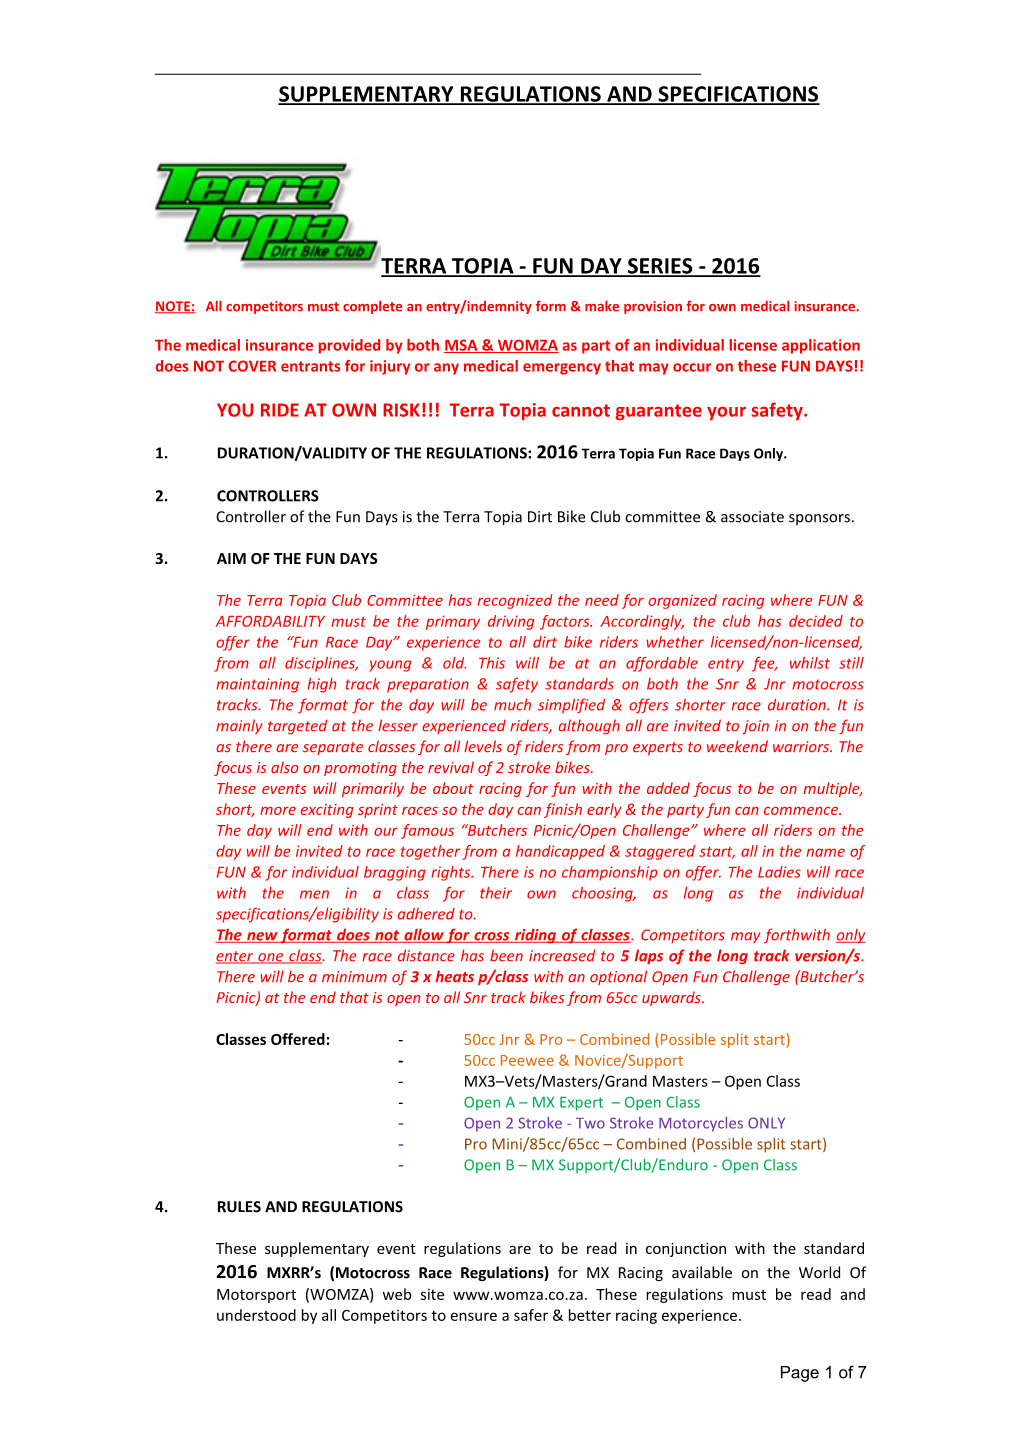 Regulations and Specifications for the 2005 Northern Regions Formula Libre Club Championship